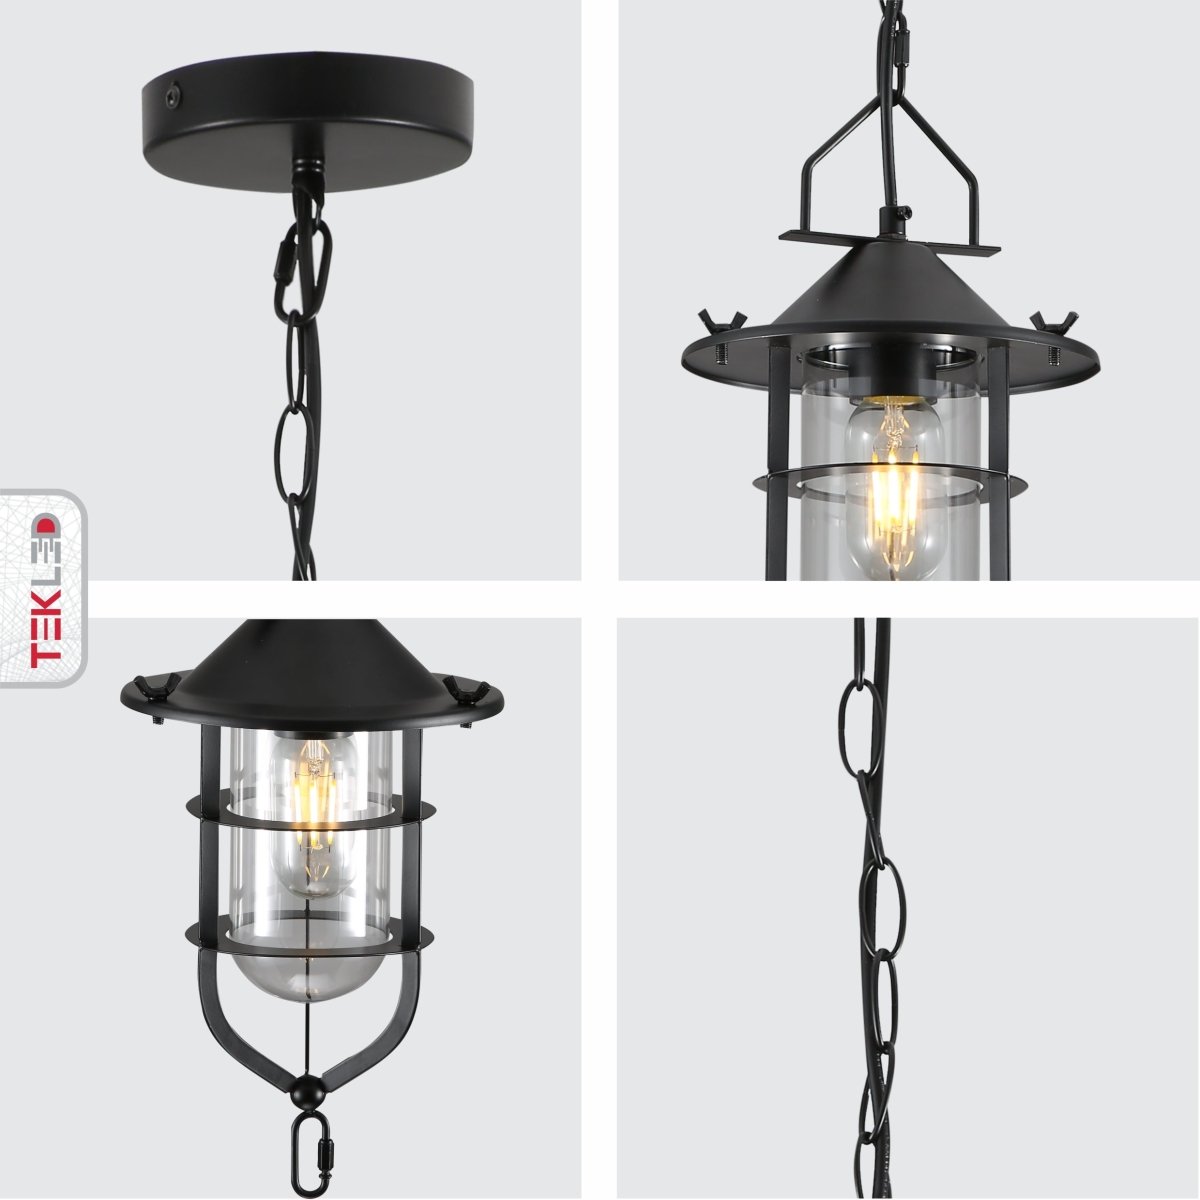 Detailed shots of Black Nautical Industrial Caged Flat Shade Small Glass Metal Ceiling Pendant Light with E27 Fitting  | TEKLED 150-18370